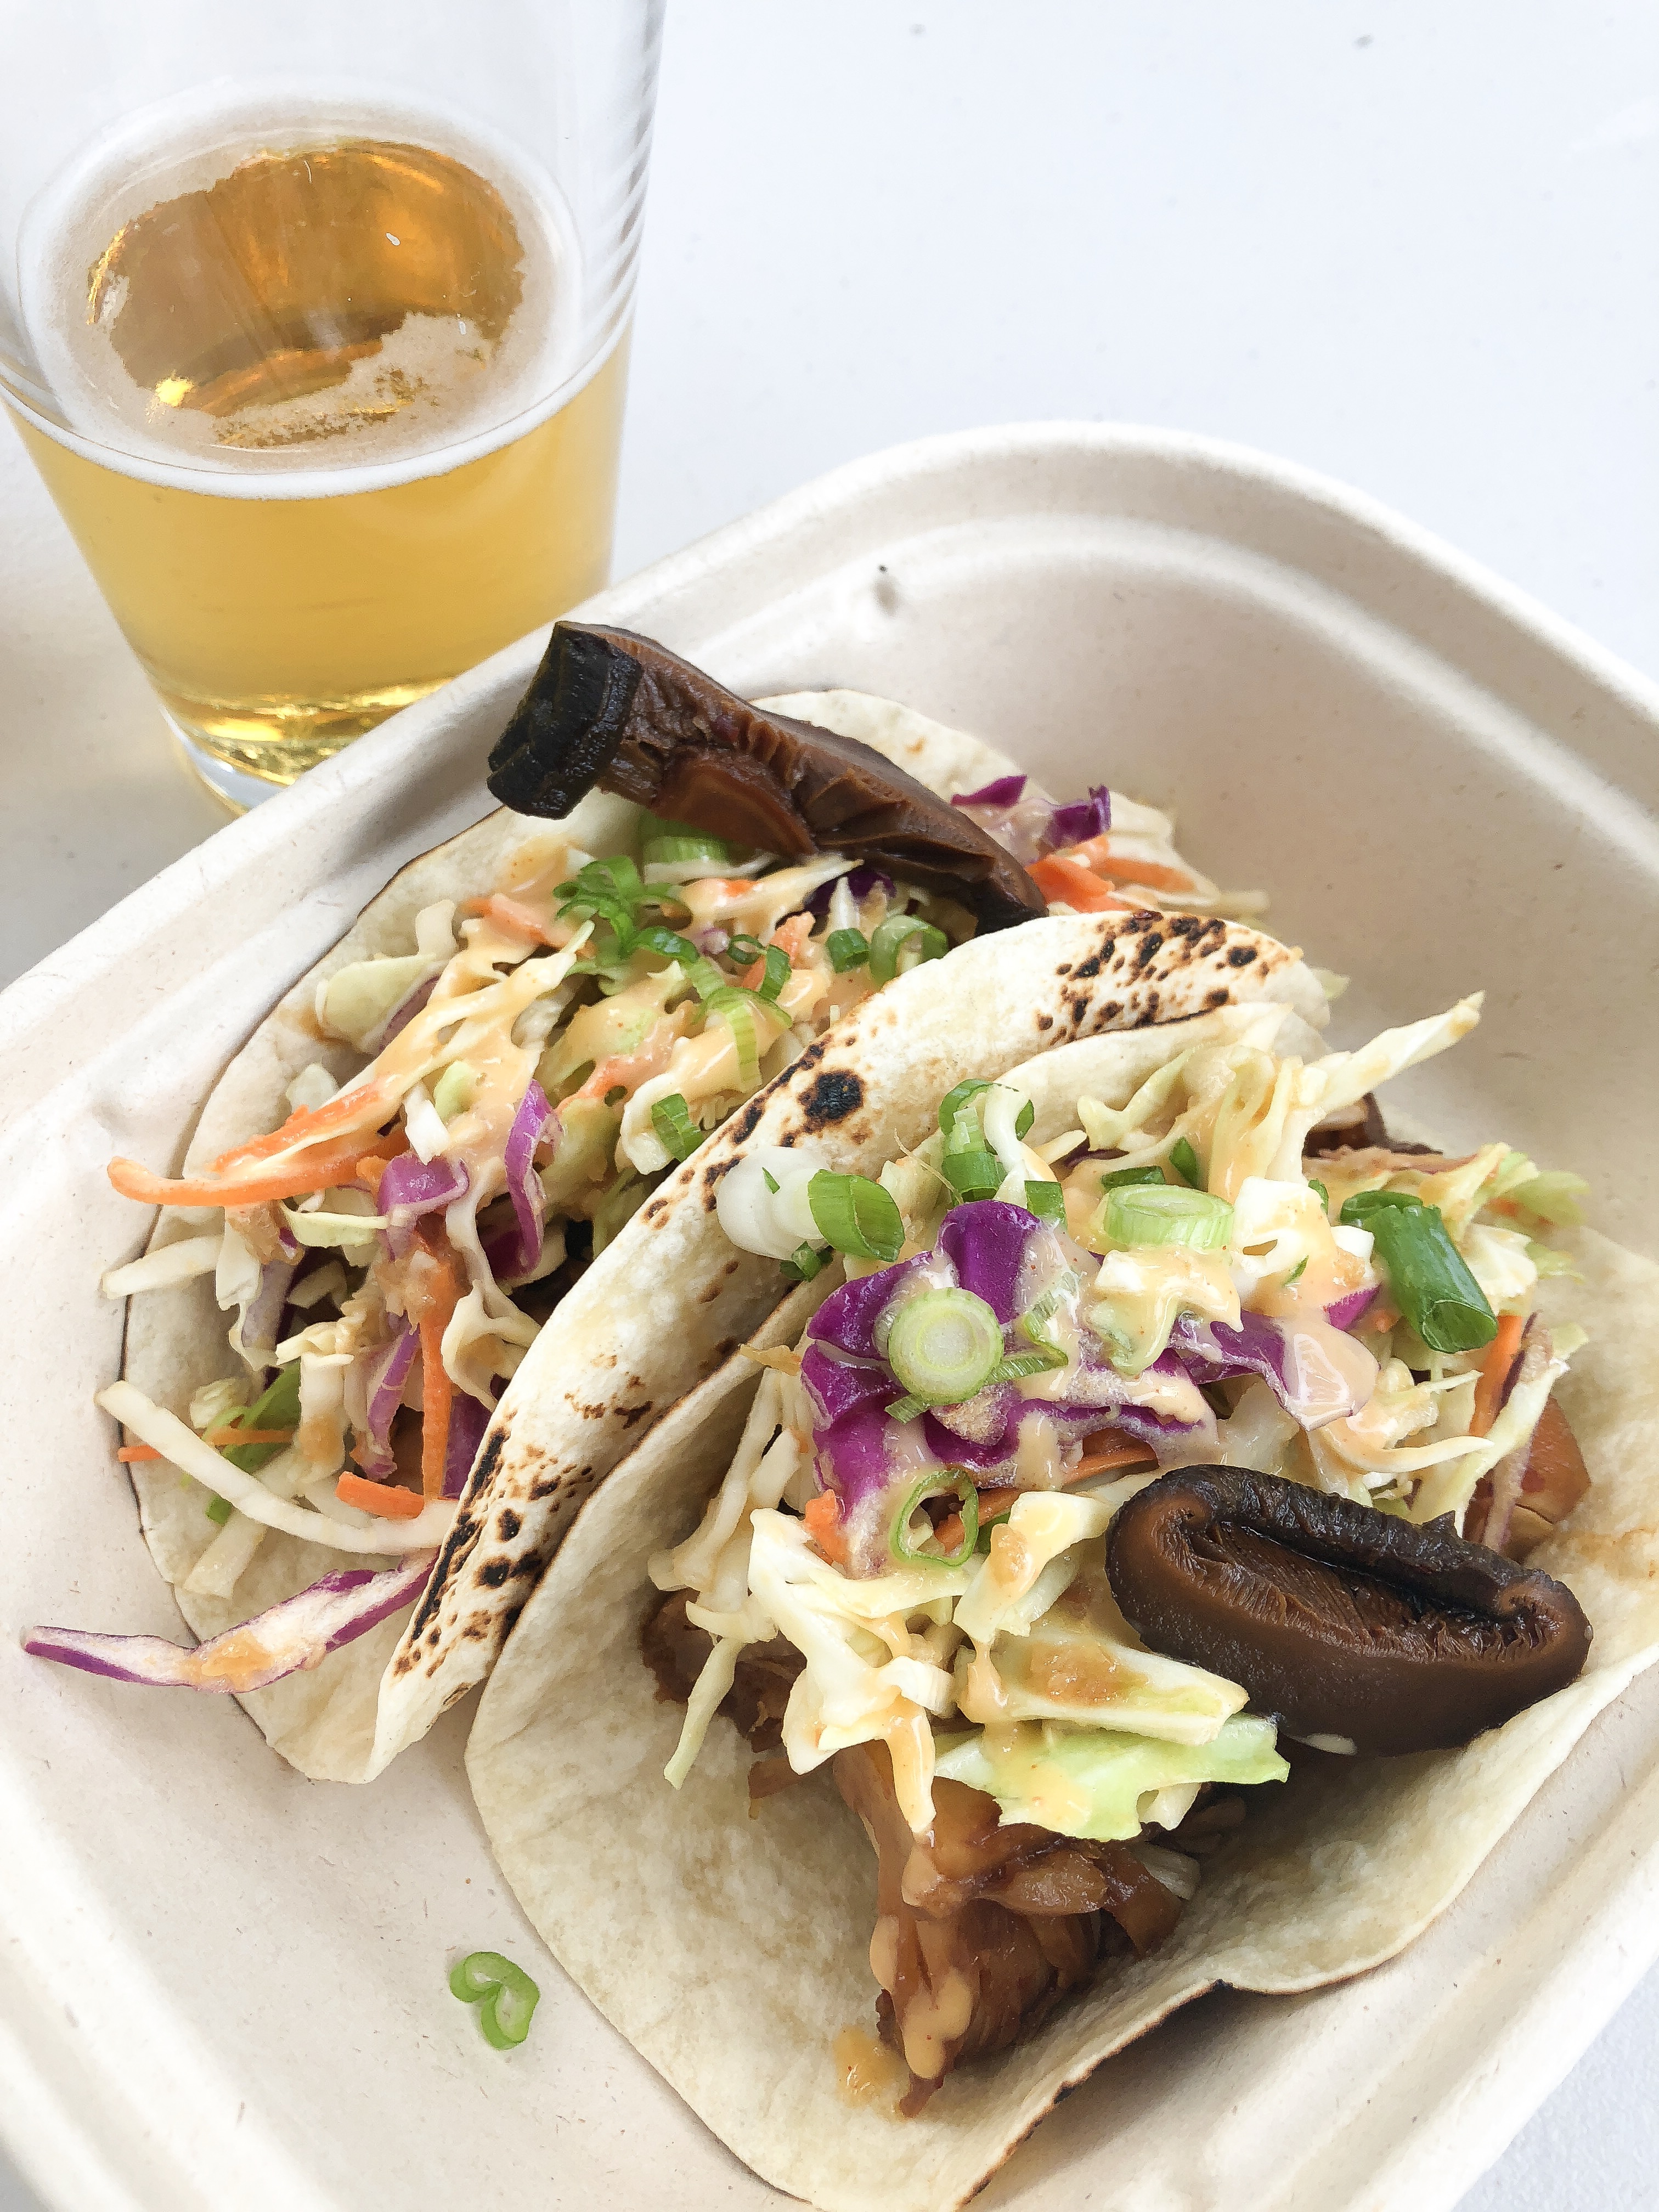 Spike's Tacos with Jackfruit, Hoisin BBQ Sauce, Asian Style Ginger Slaw and Pickled Shiitake Mushrooms